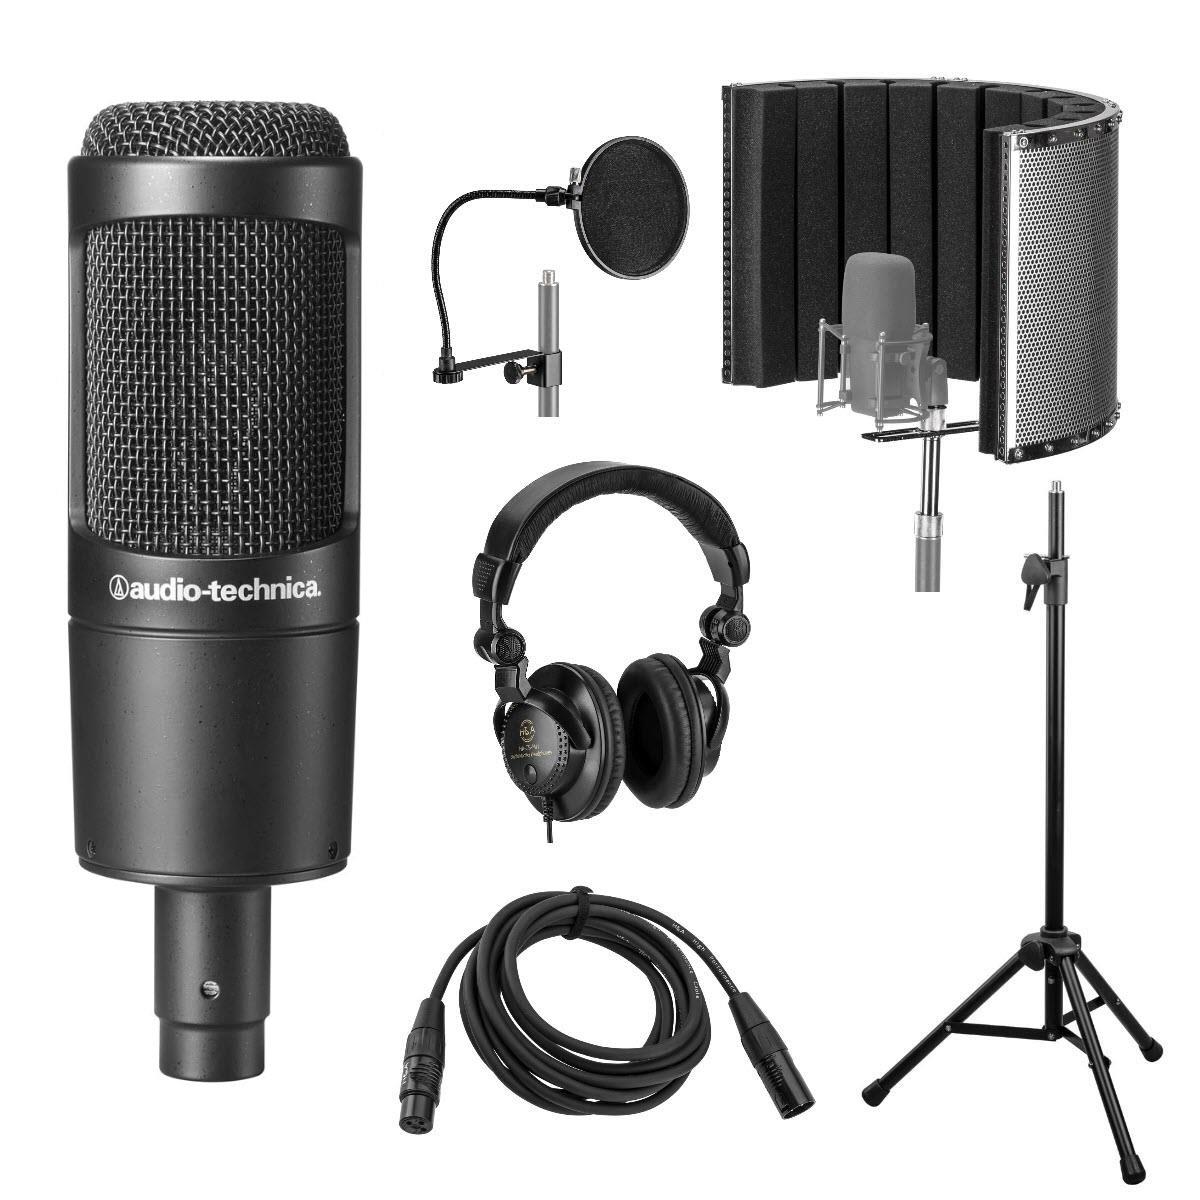 Image of Audio-Technica AT2035 Side-Address Microphone with Vocal Recording Setup Kit